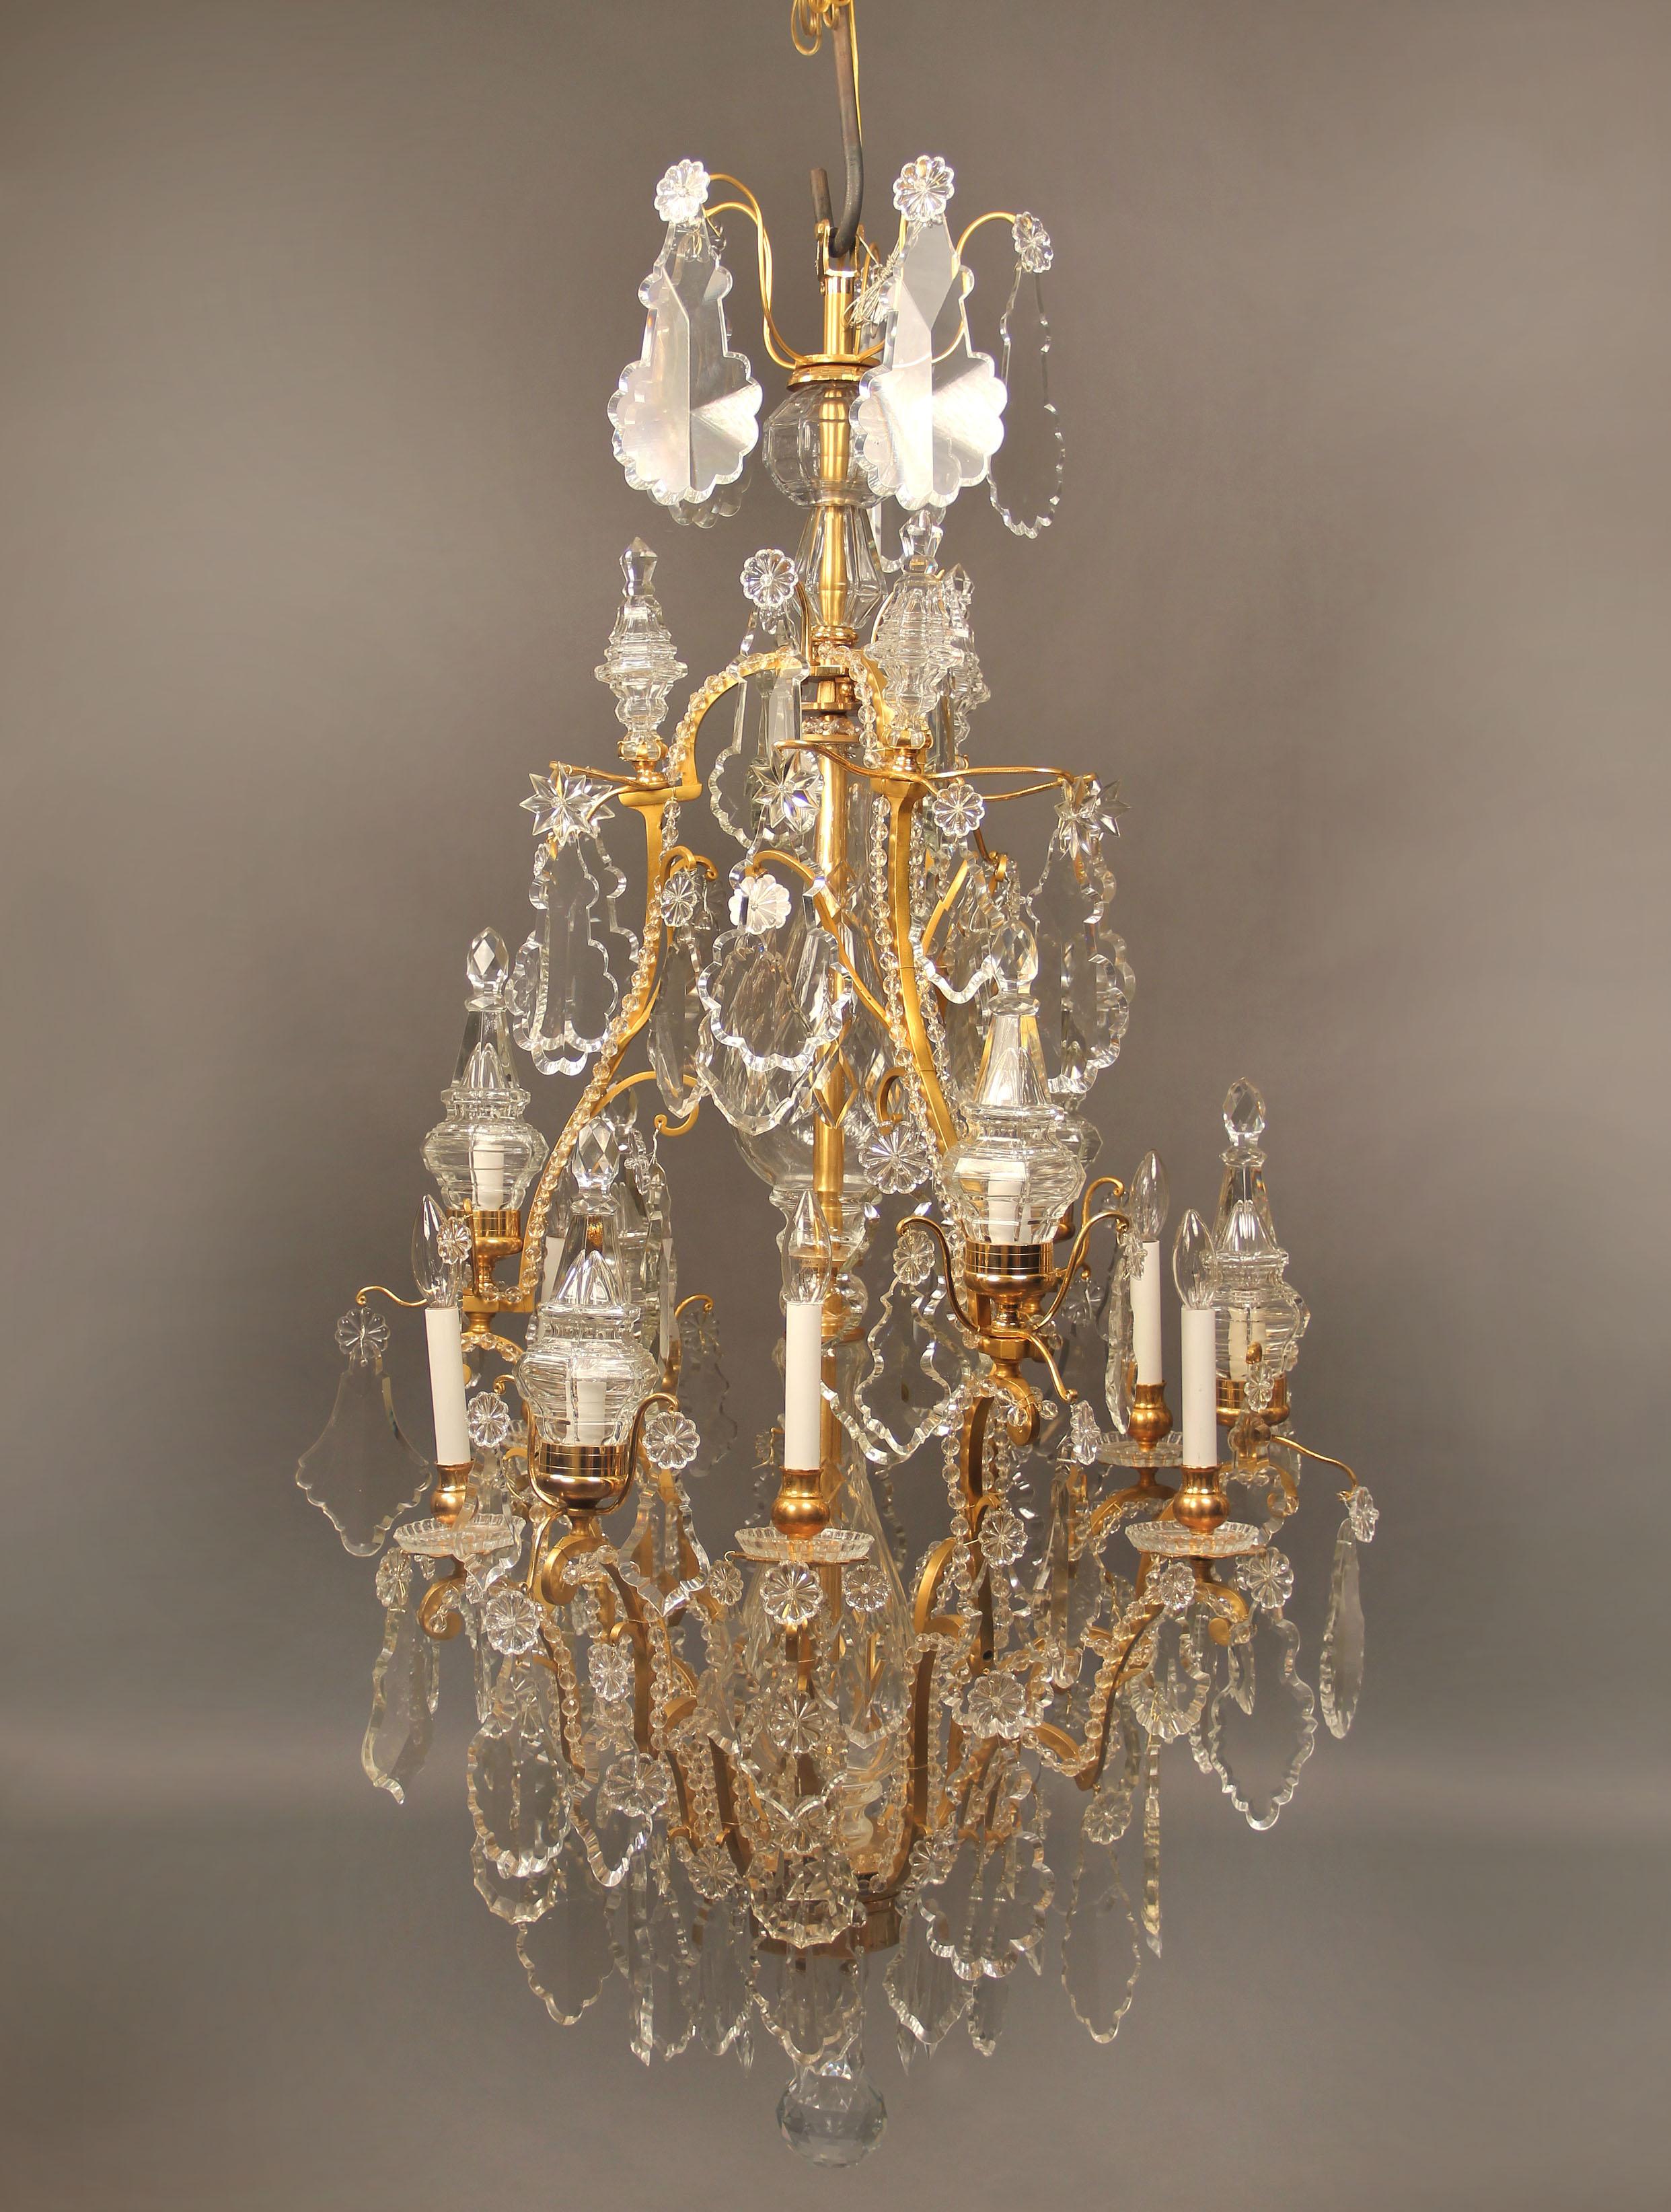 A Fantastic late 19th century Gilt Bronze and Baccarat Crystal Twelve Light Chandelier

Multi-faceted and shaped crystal, beaded arms, cut crystal central column, 6 lit spears as part of the twelve perimeter lights, bobeche cups.